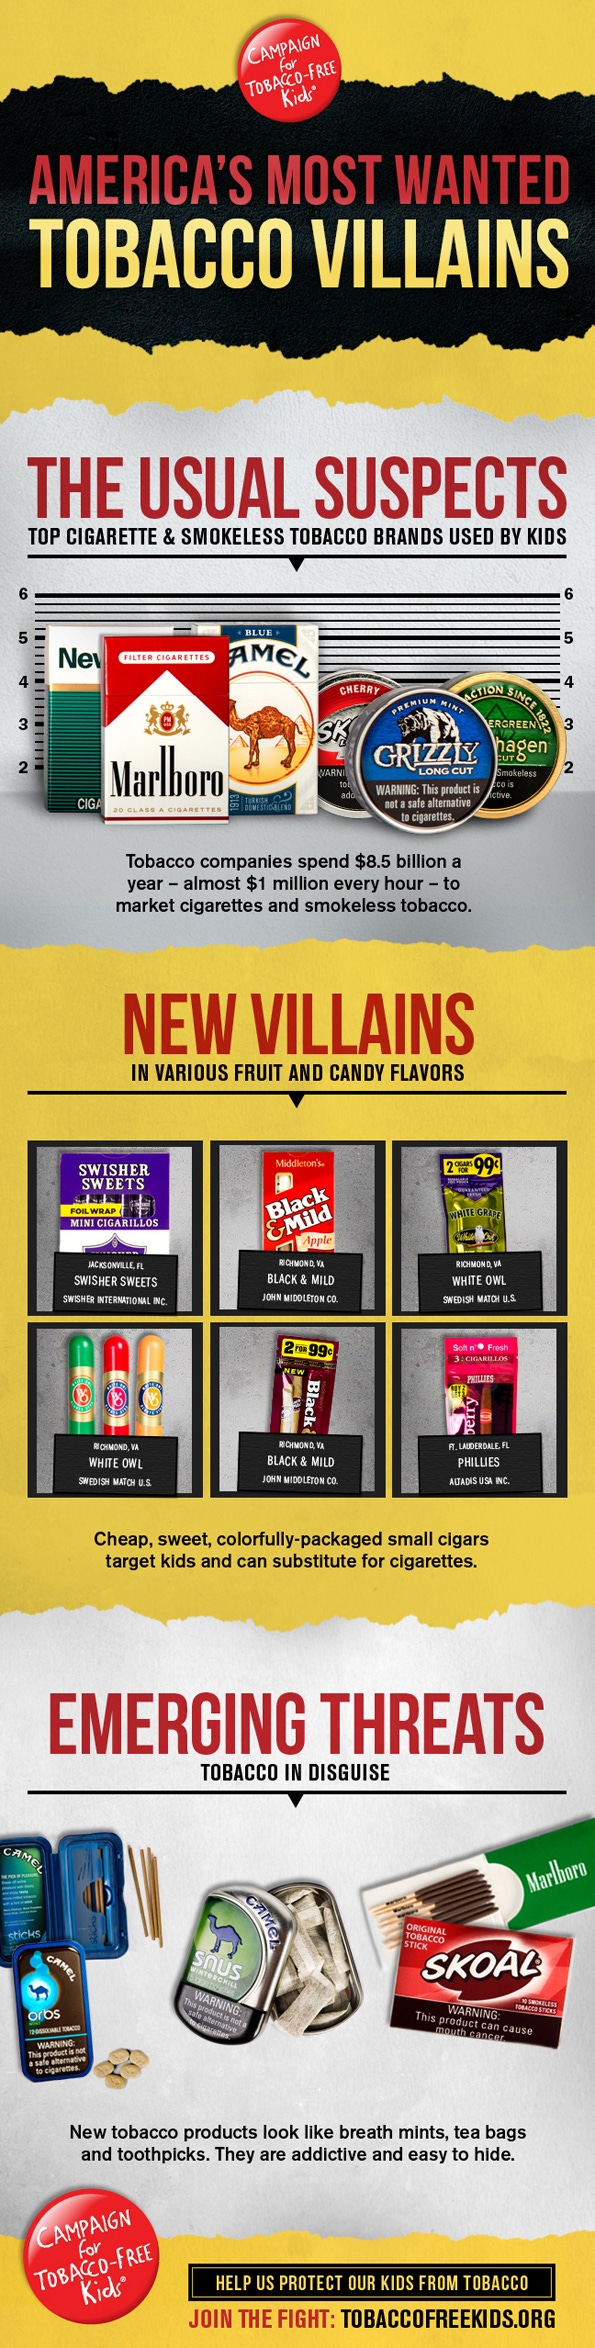 Infographics: America's most wanted tobacco villains vs. good guys putting them out